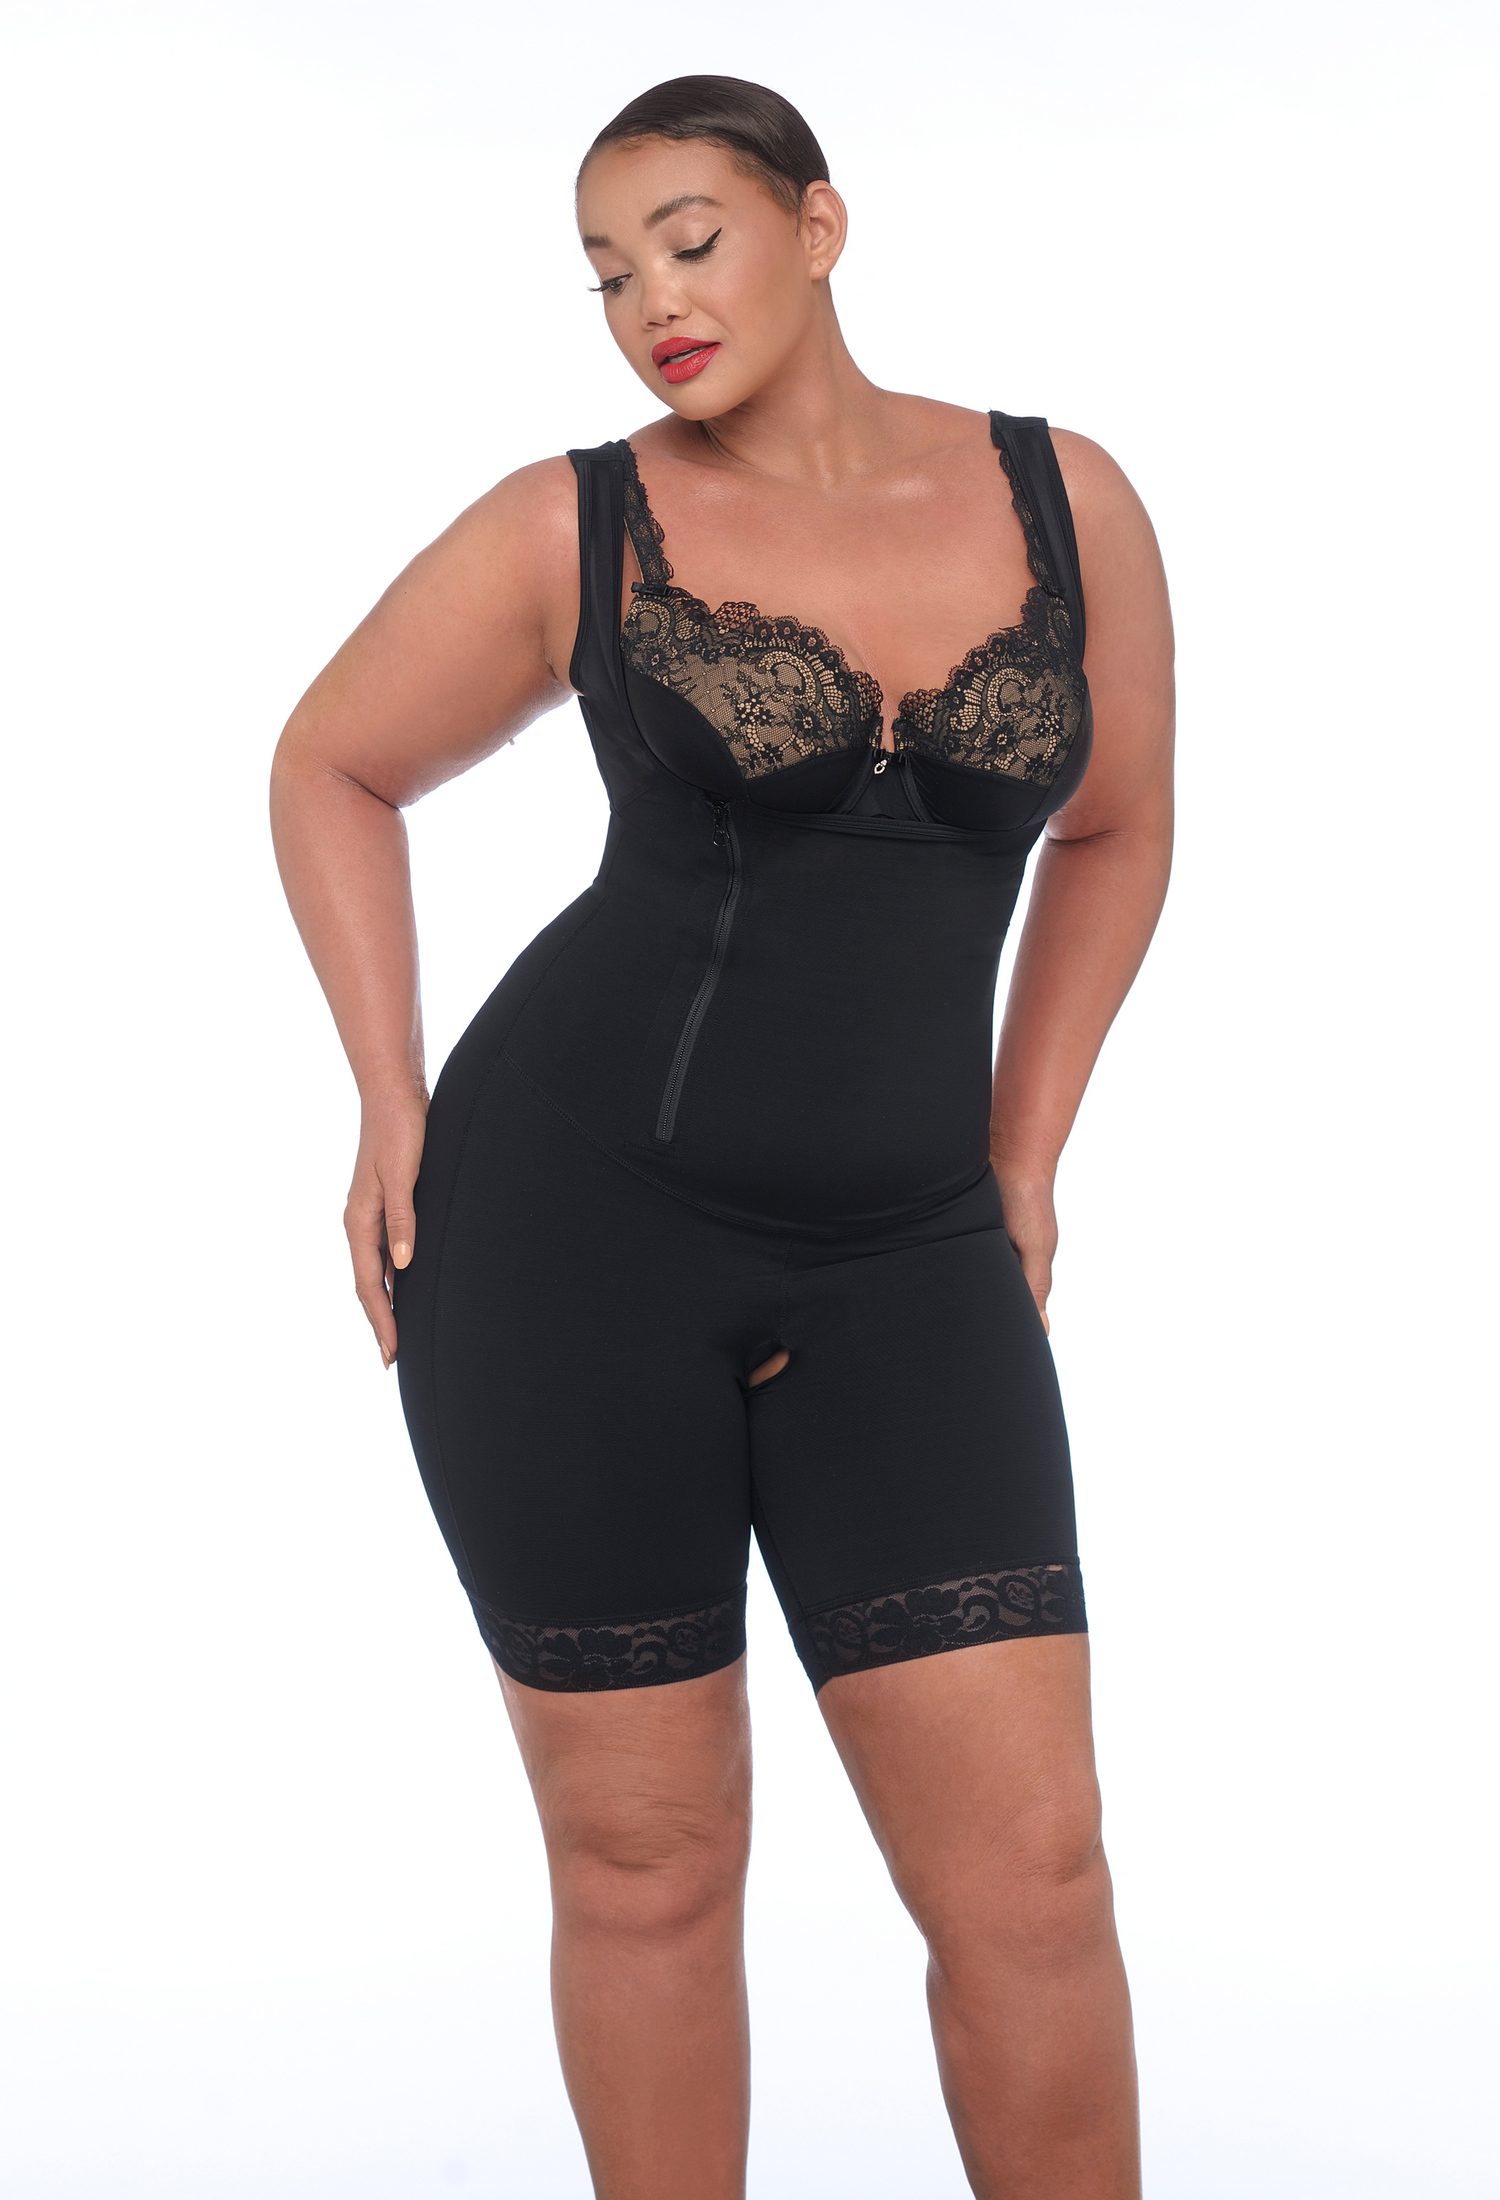 Diva's Curves - Full Coverage Shapewear Compression - Post Surgical This  comfortable Shapewear Compression garment tightens your stomach, hips, and  derriere to flatten out and give you sexy curves. 1. Wide adjustable